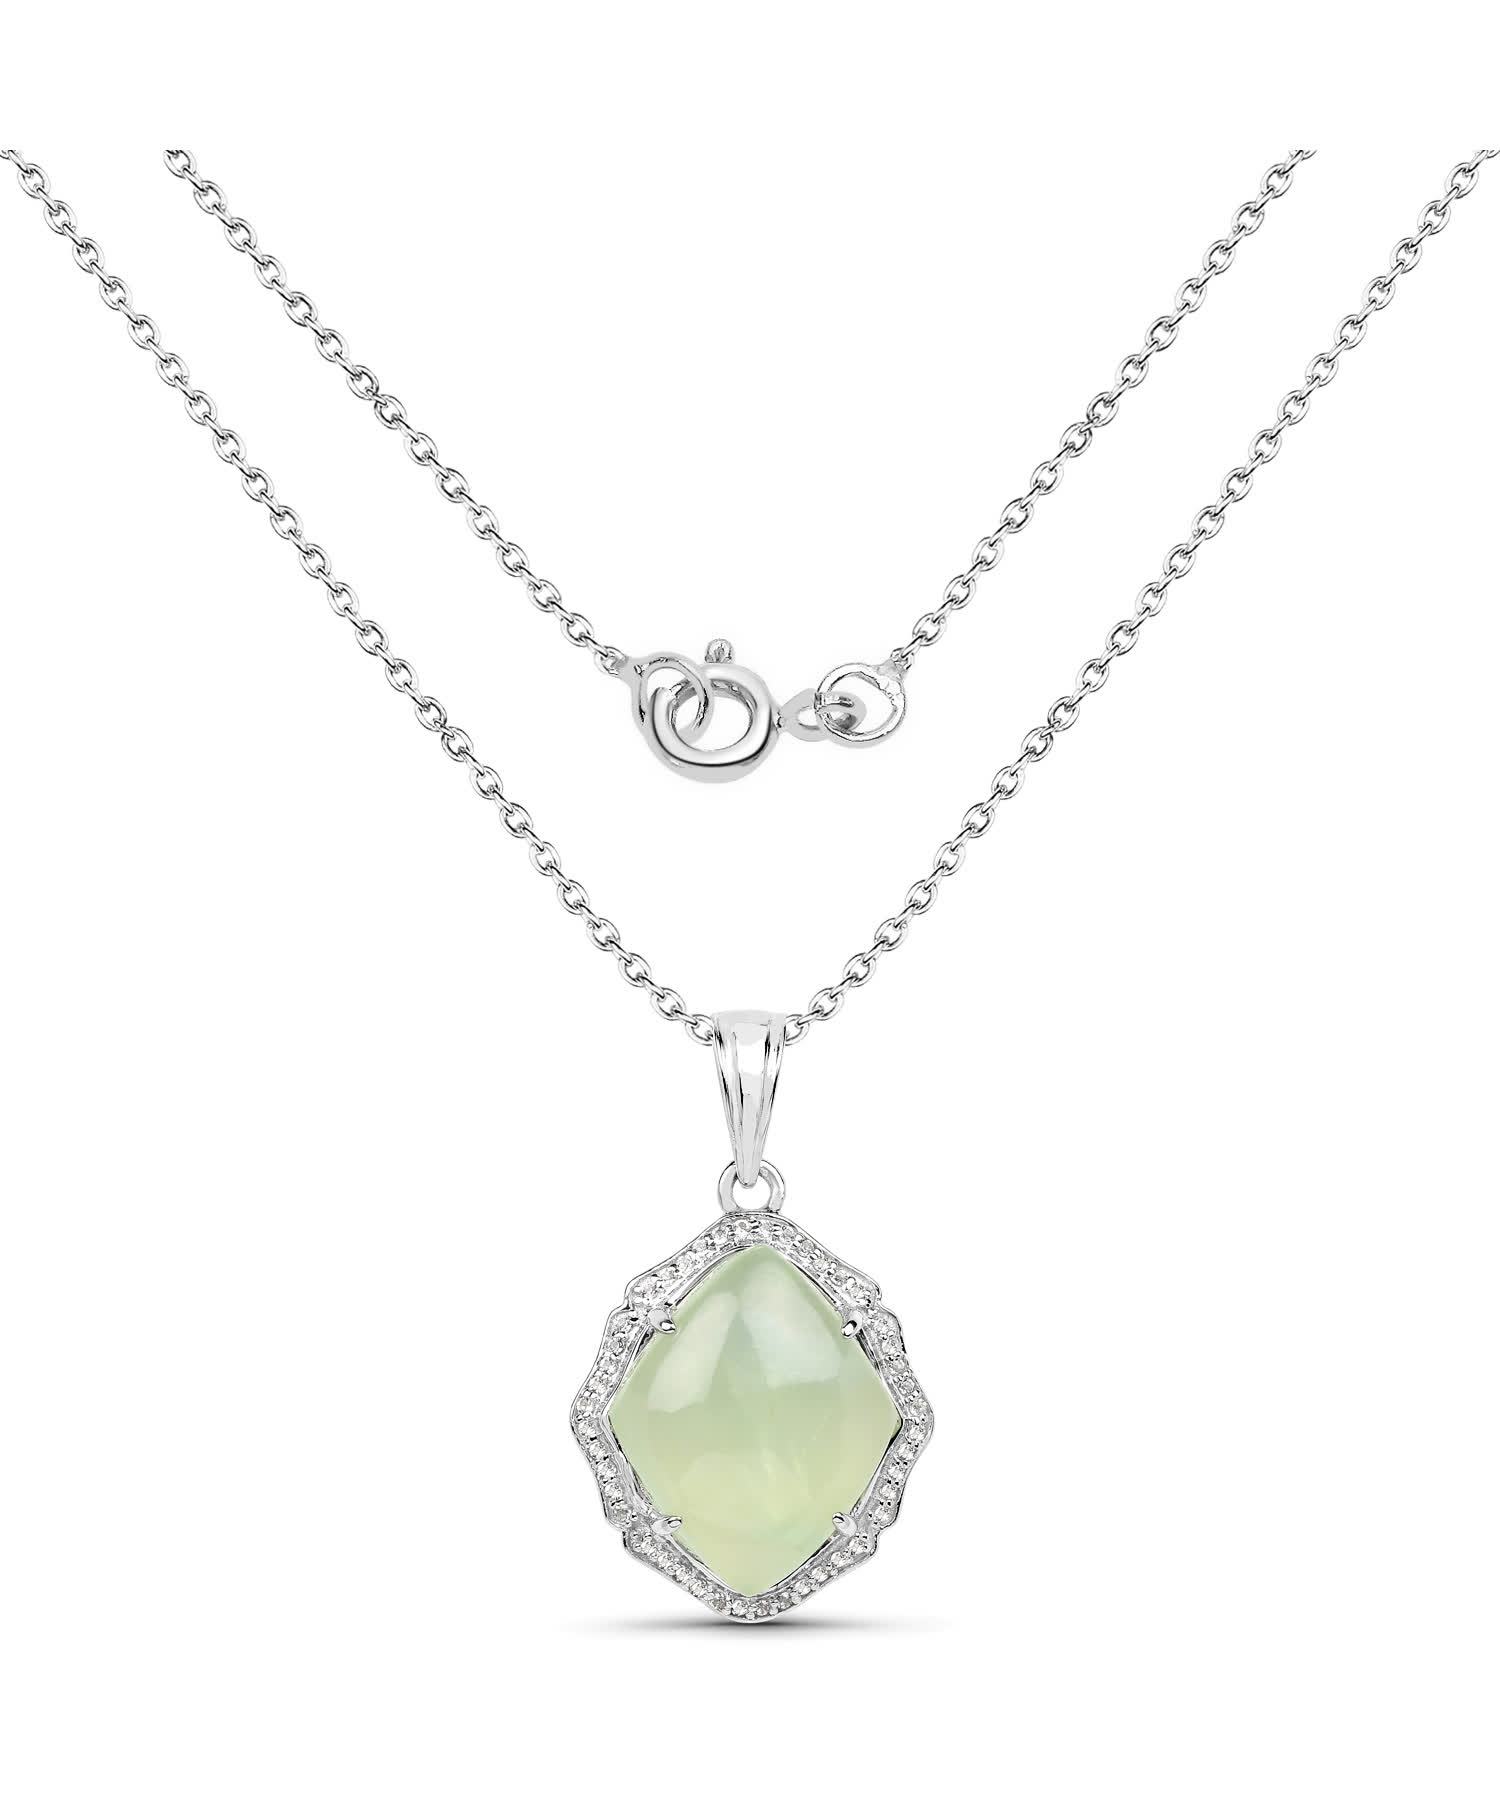 7.49ctw Natural Prehnite and Topaz Rhodium Plated 925 Sterling Silver Pendant With Chain View 2